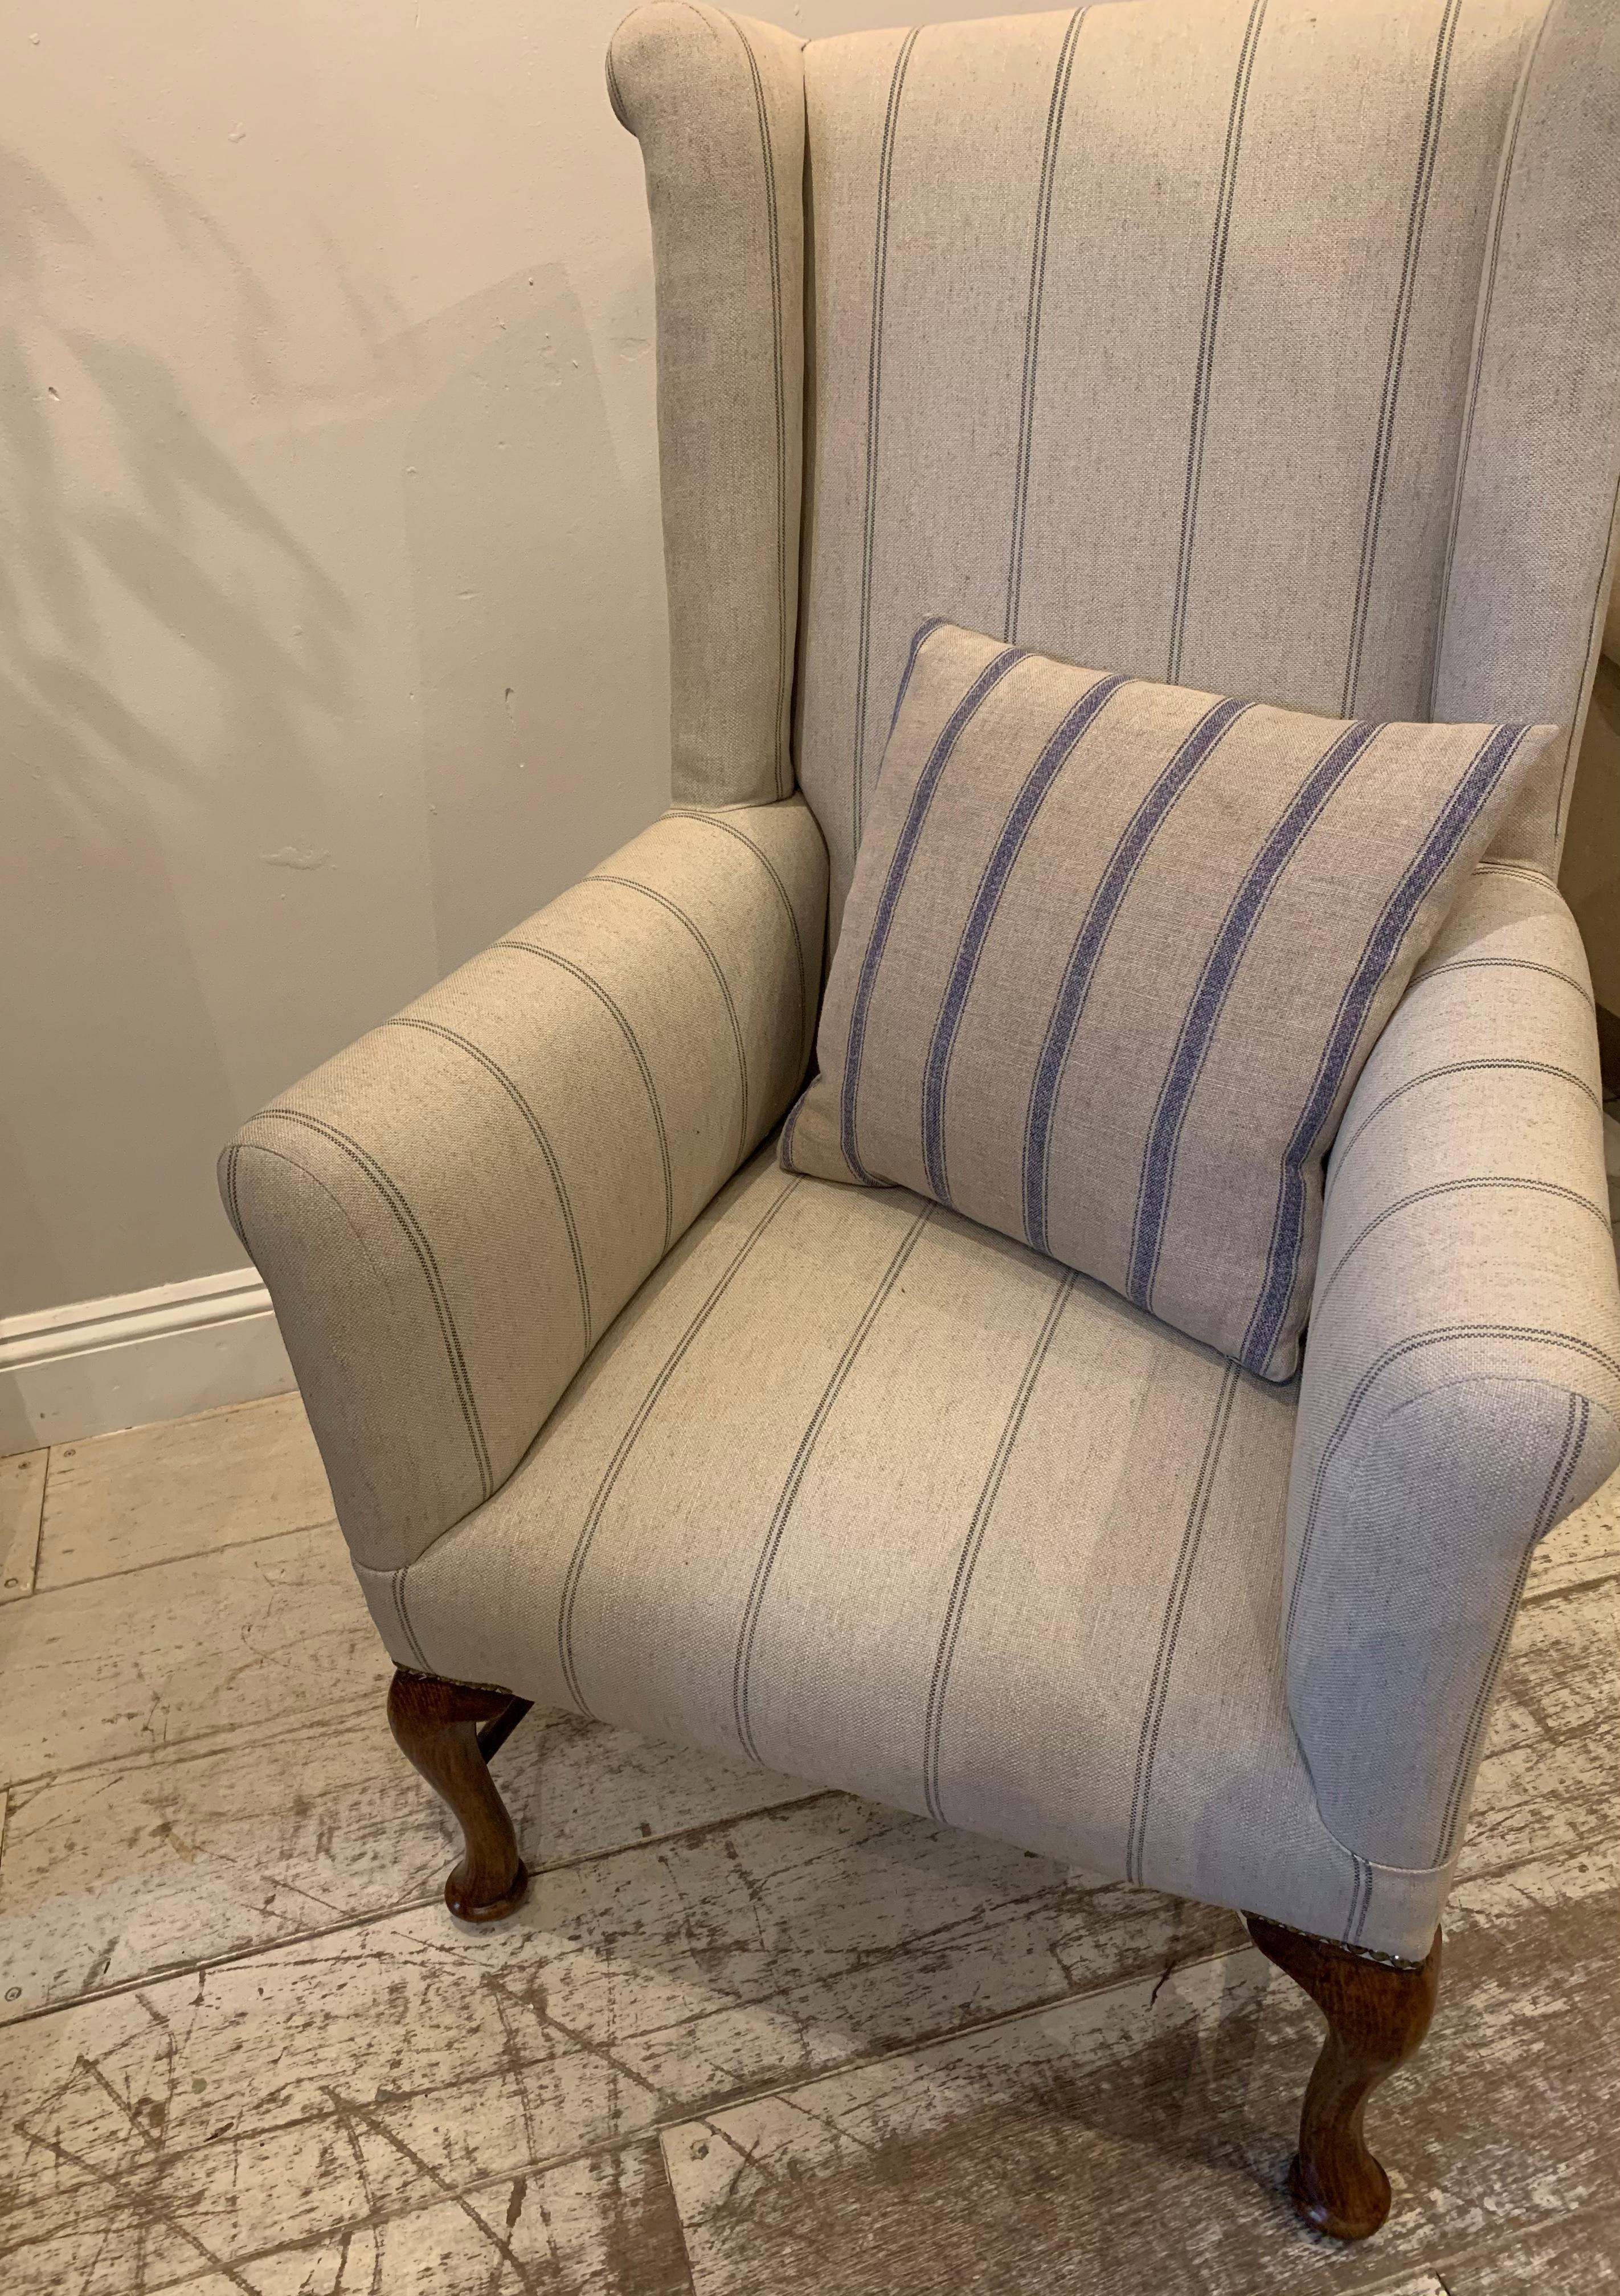 Circa 1900 English Wingback Armchair with Walnut Legs in a Neutral Linen Fabric 2